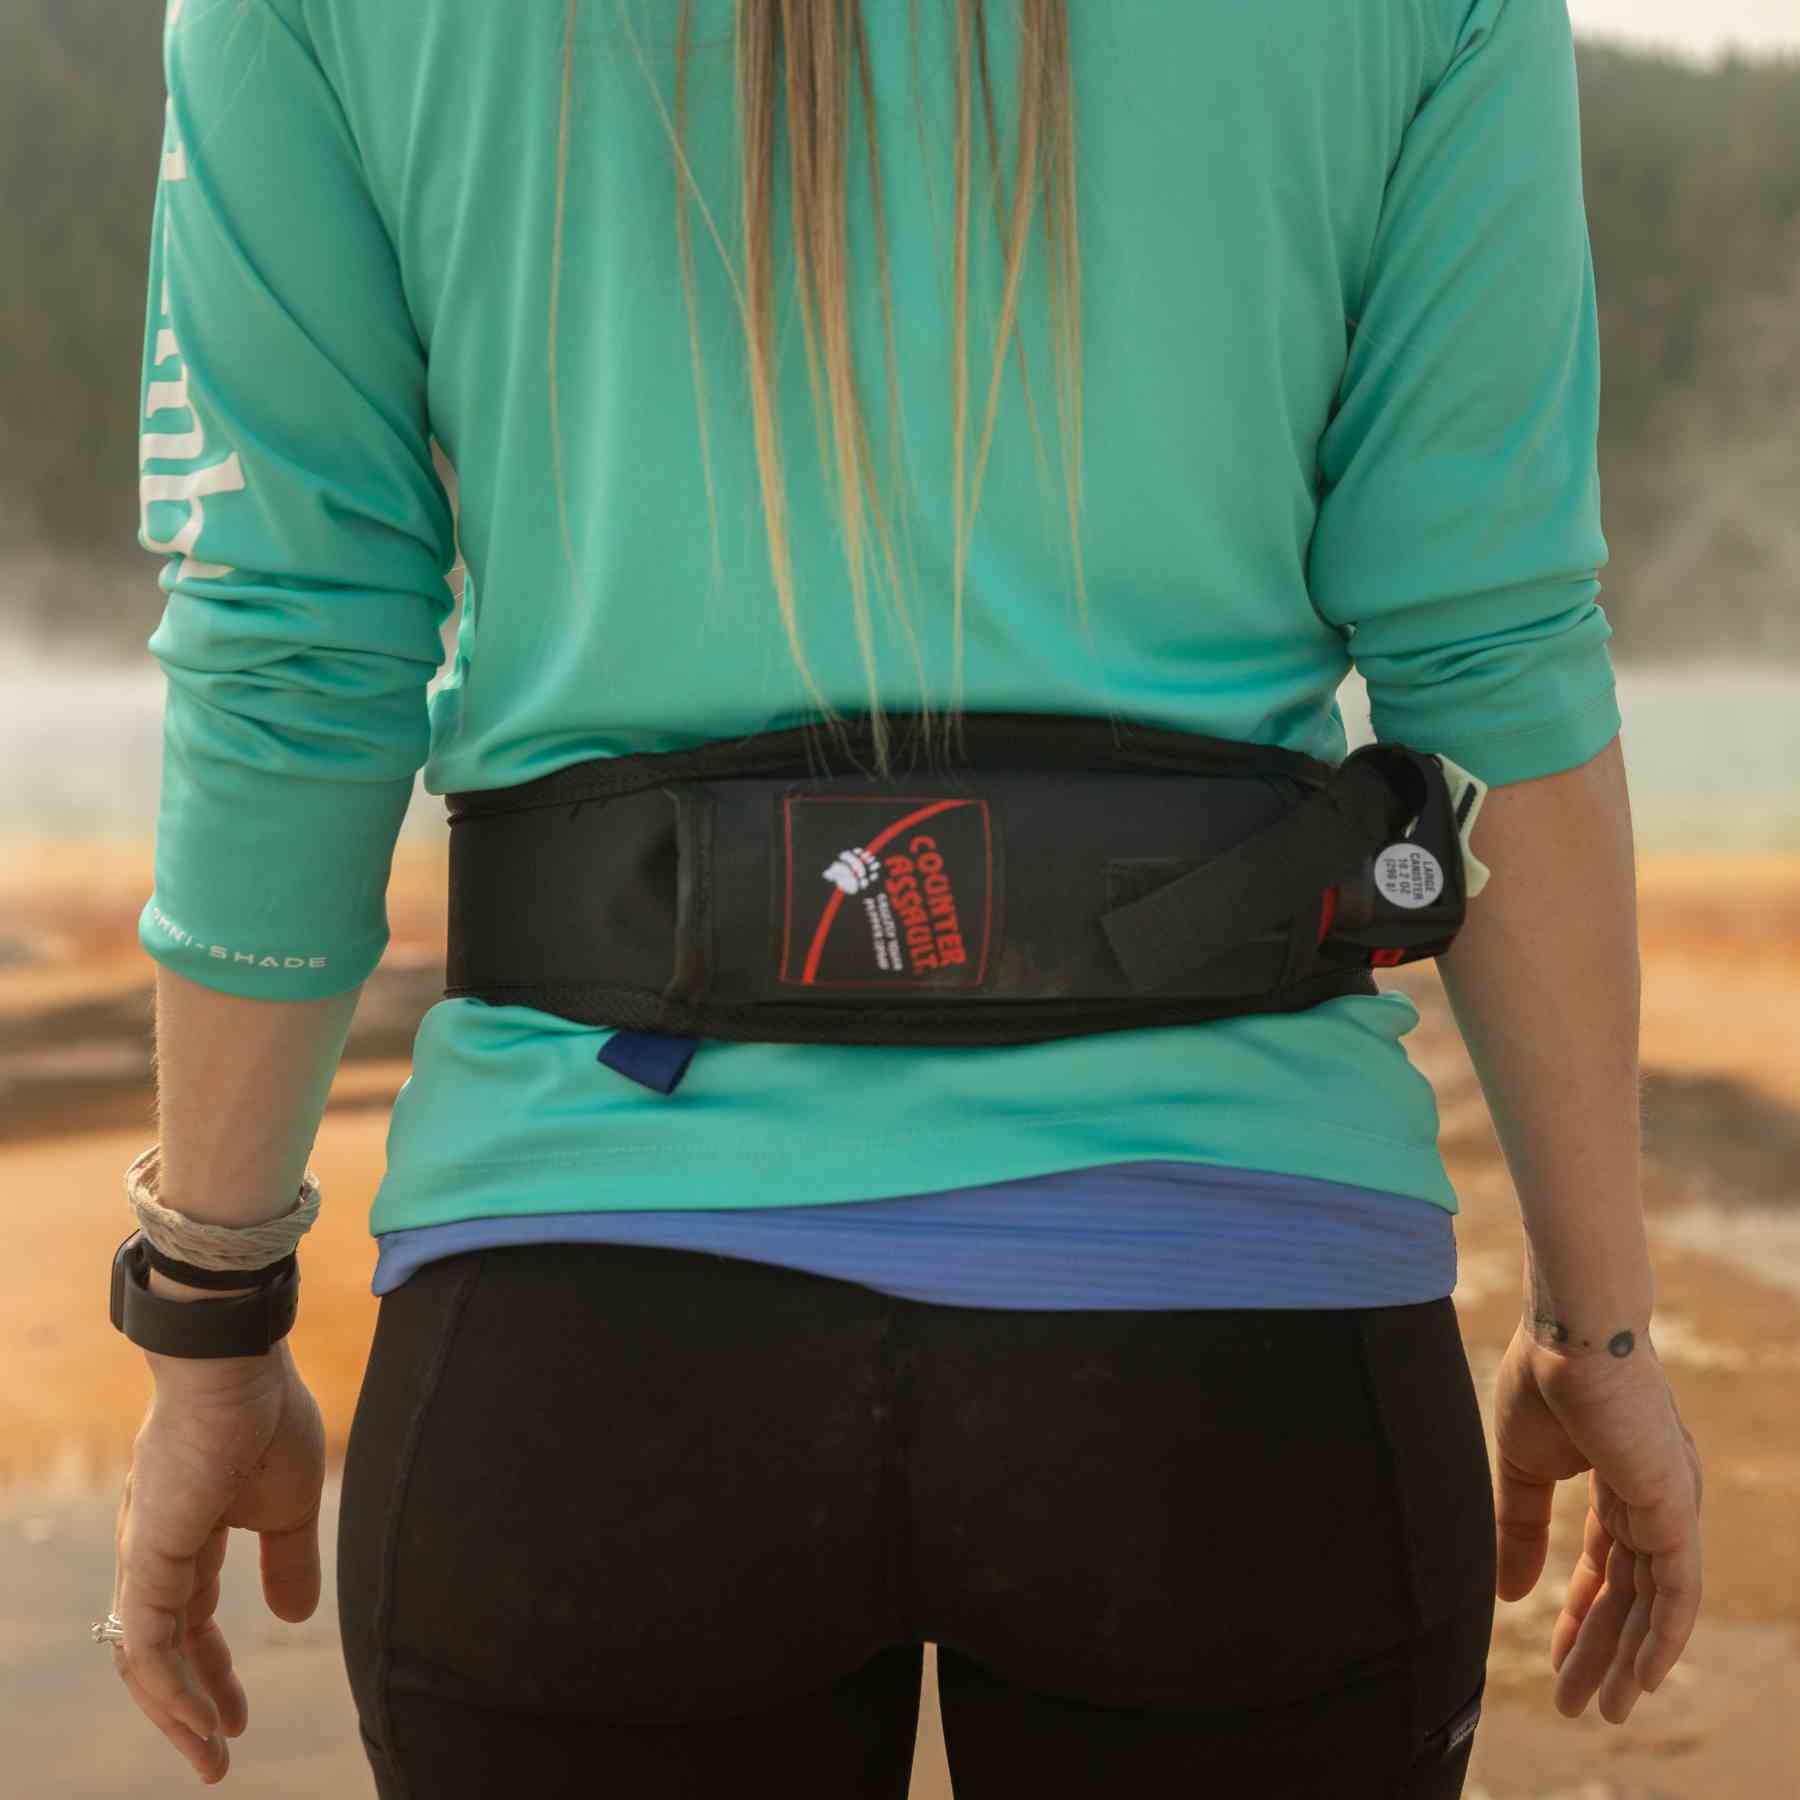 Woman with a trail runner holster attached